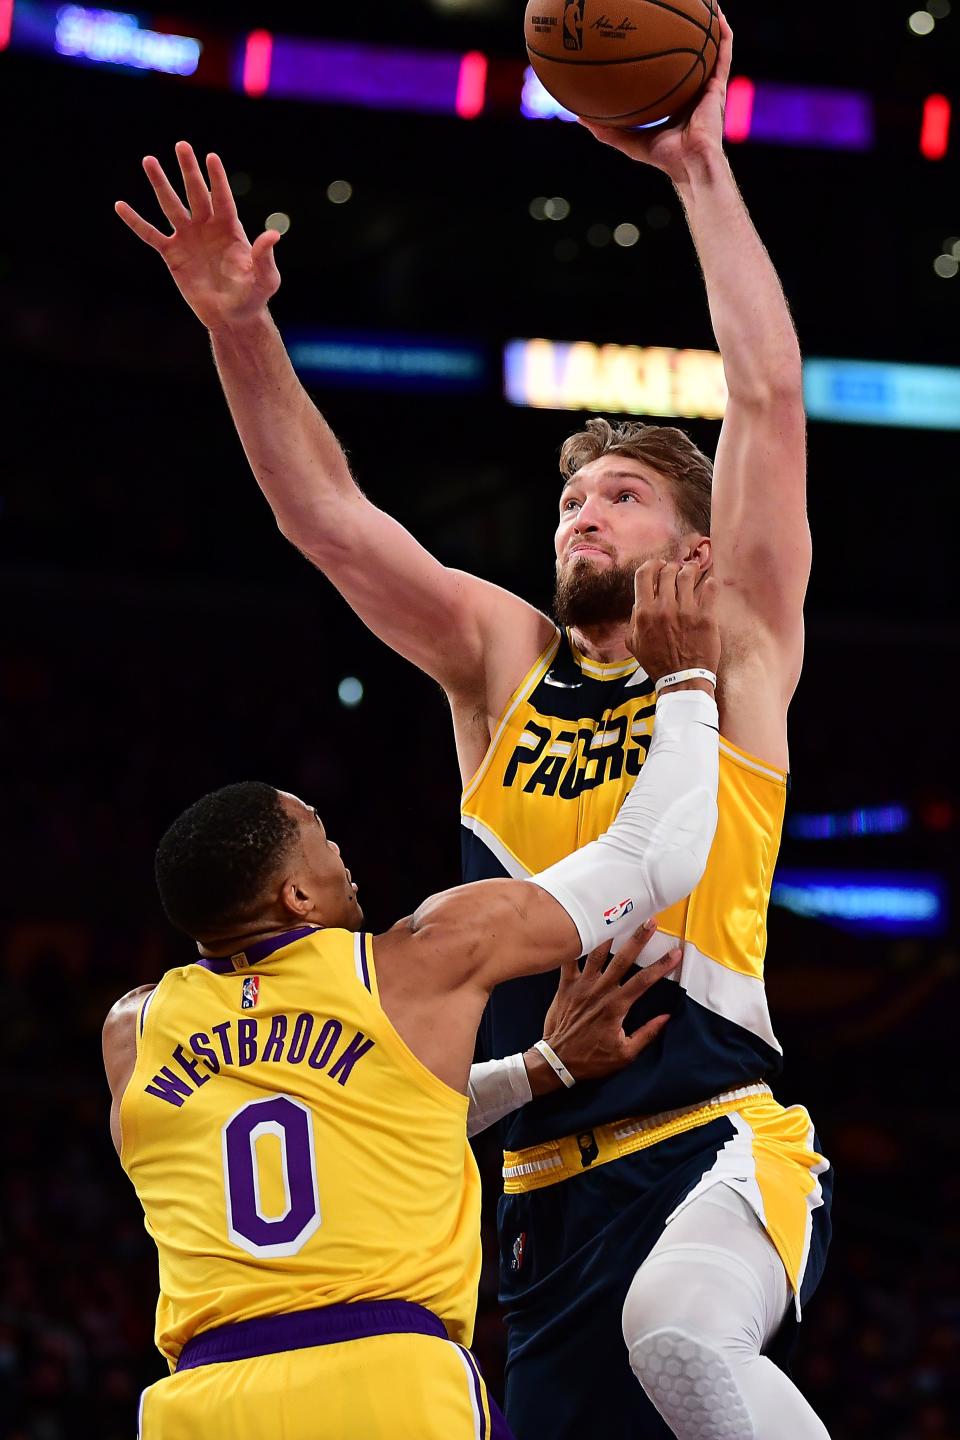 Jan 19, 2022; Los Angeles, California, USA; Indiana Pacers forward Domantas Sabonis (11) moves to the basket against Los Angeles Lakers guard Russell Westbrook (0) during the first half at Crypto.com Arena. Mandatory Credit: Gary A. Vasquez-USA TODAY Sports